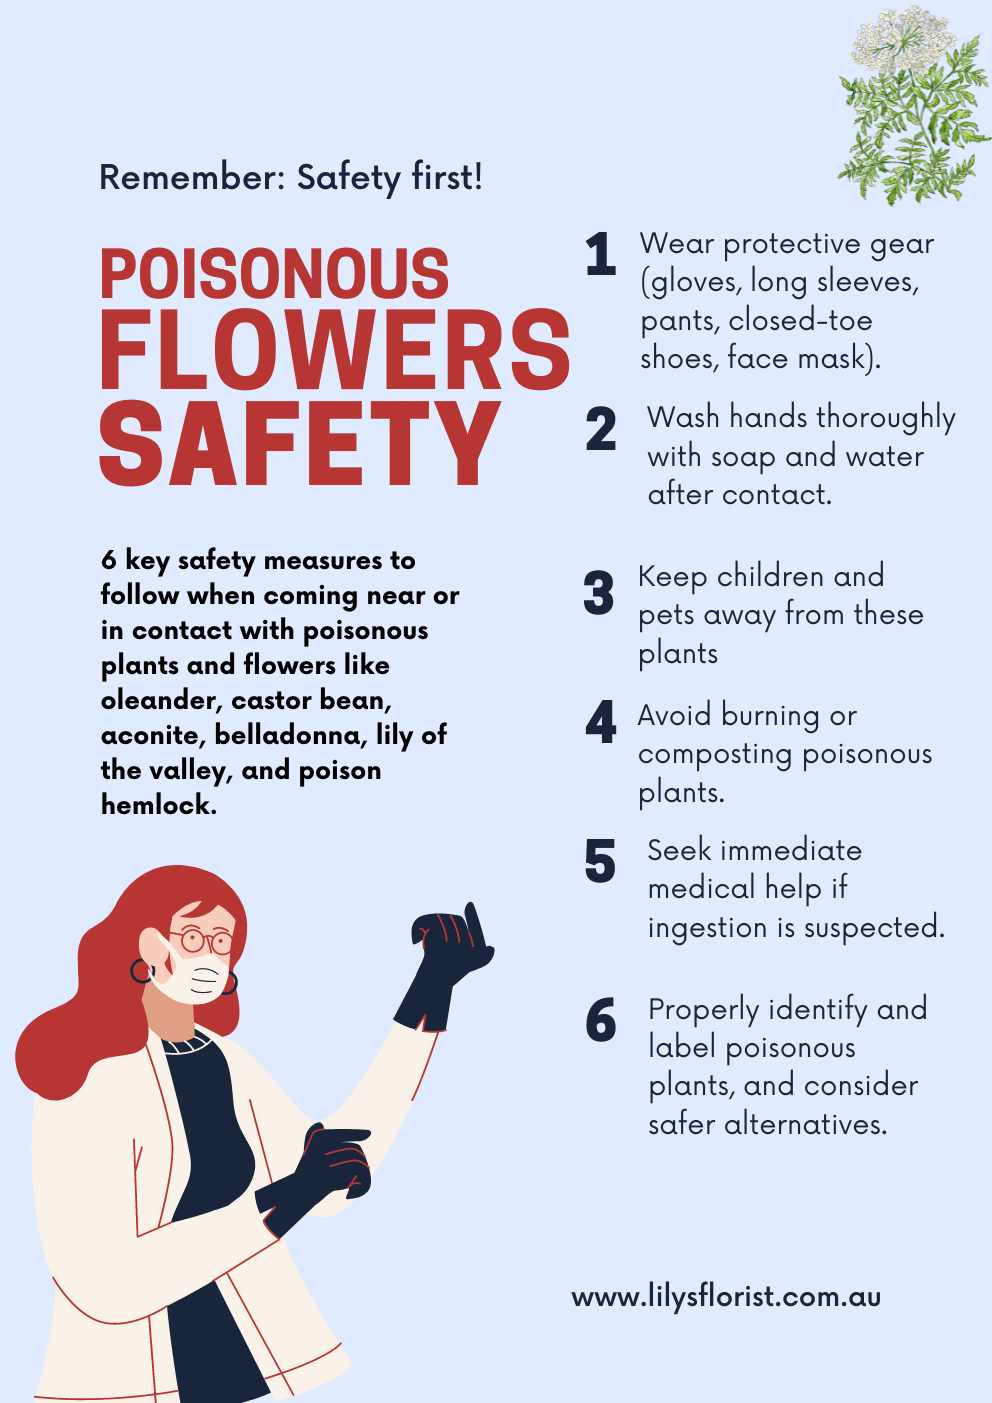 The World's Most Poisonous Flowers - precautions and safety measures